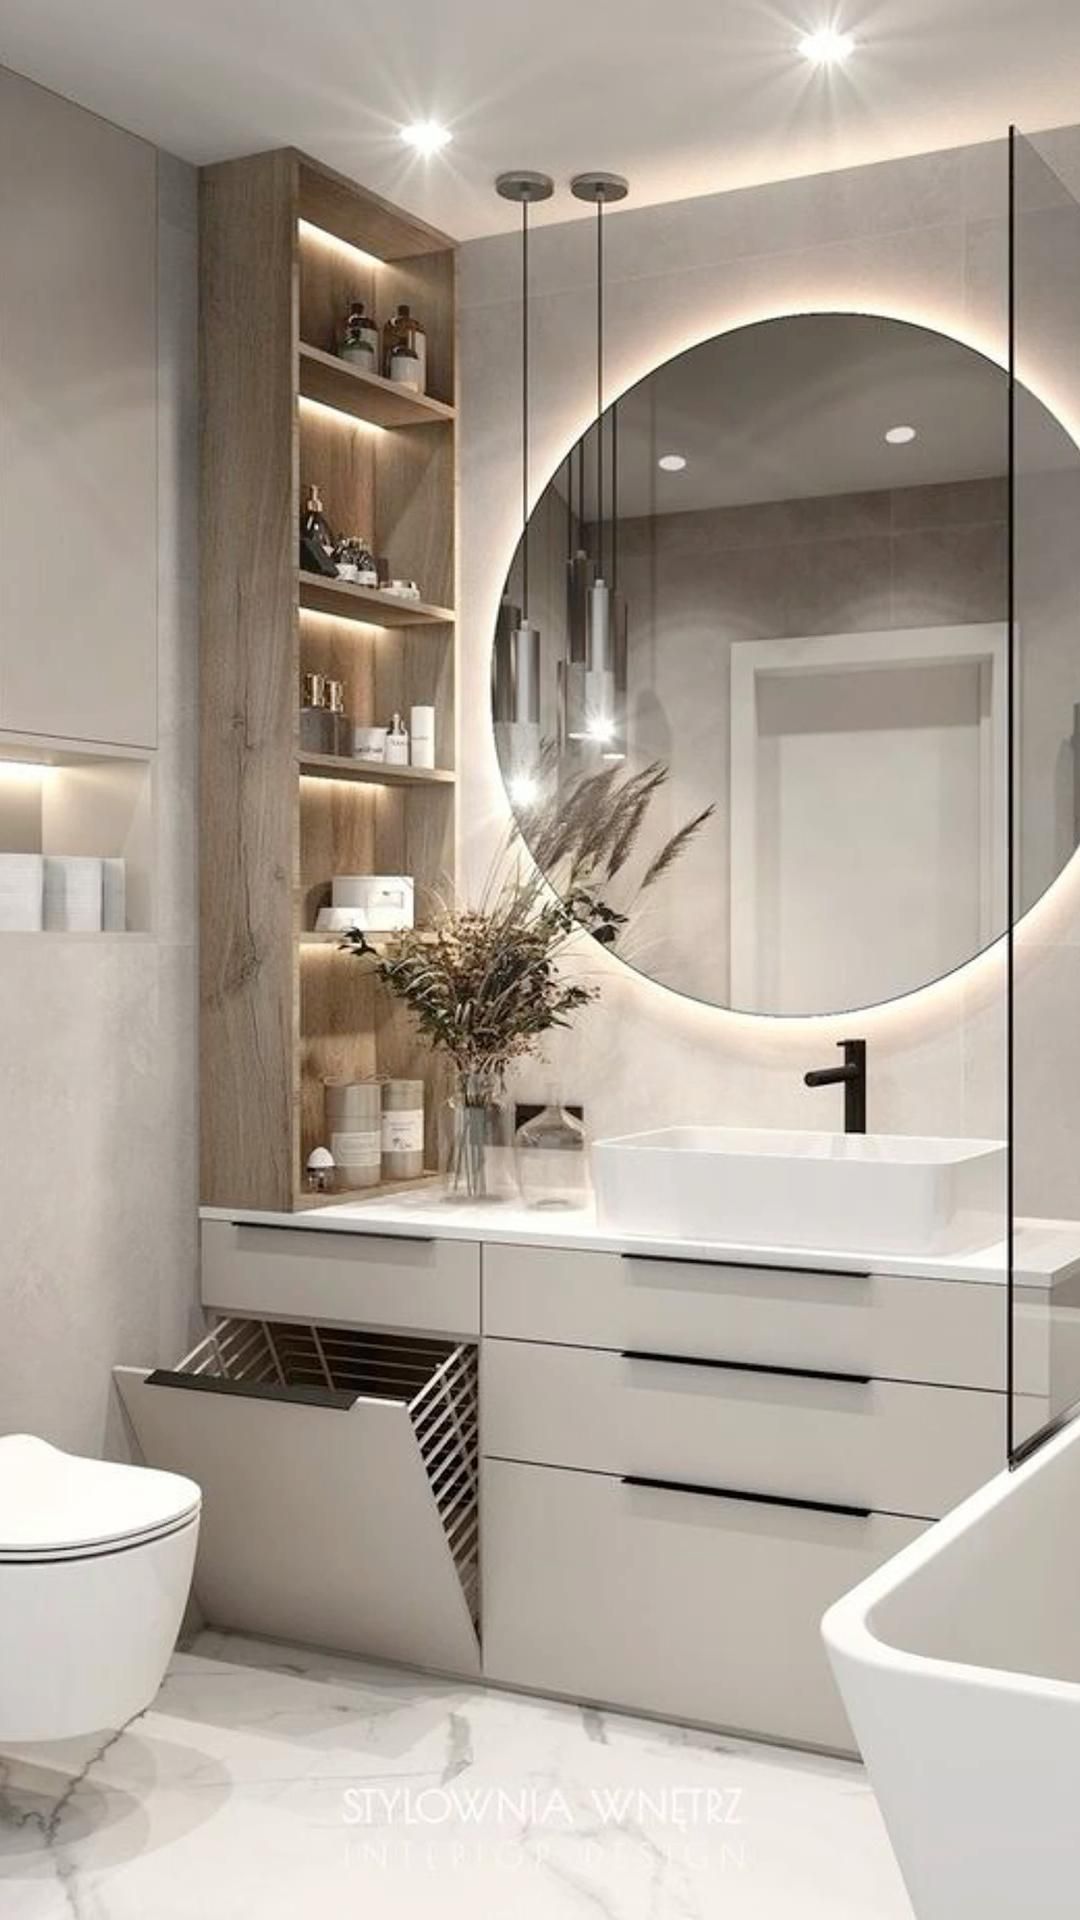 Revamp Your Tiny Bathroom with These Contemporary Decor Ideas